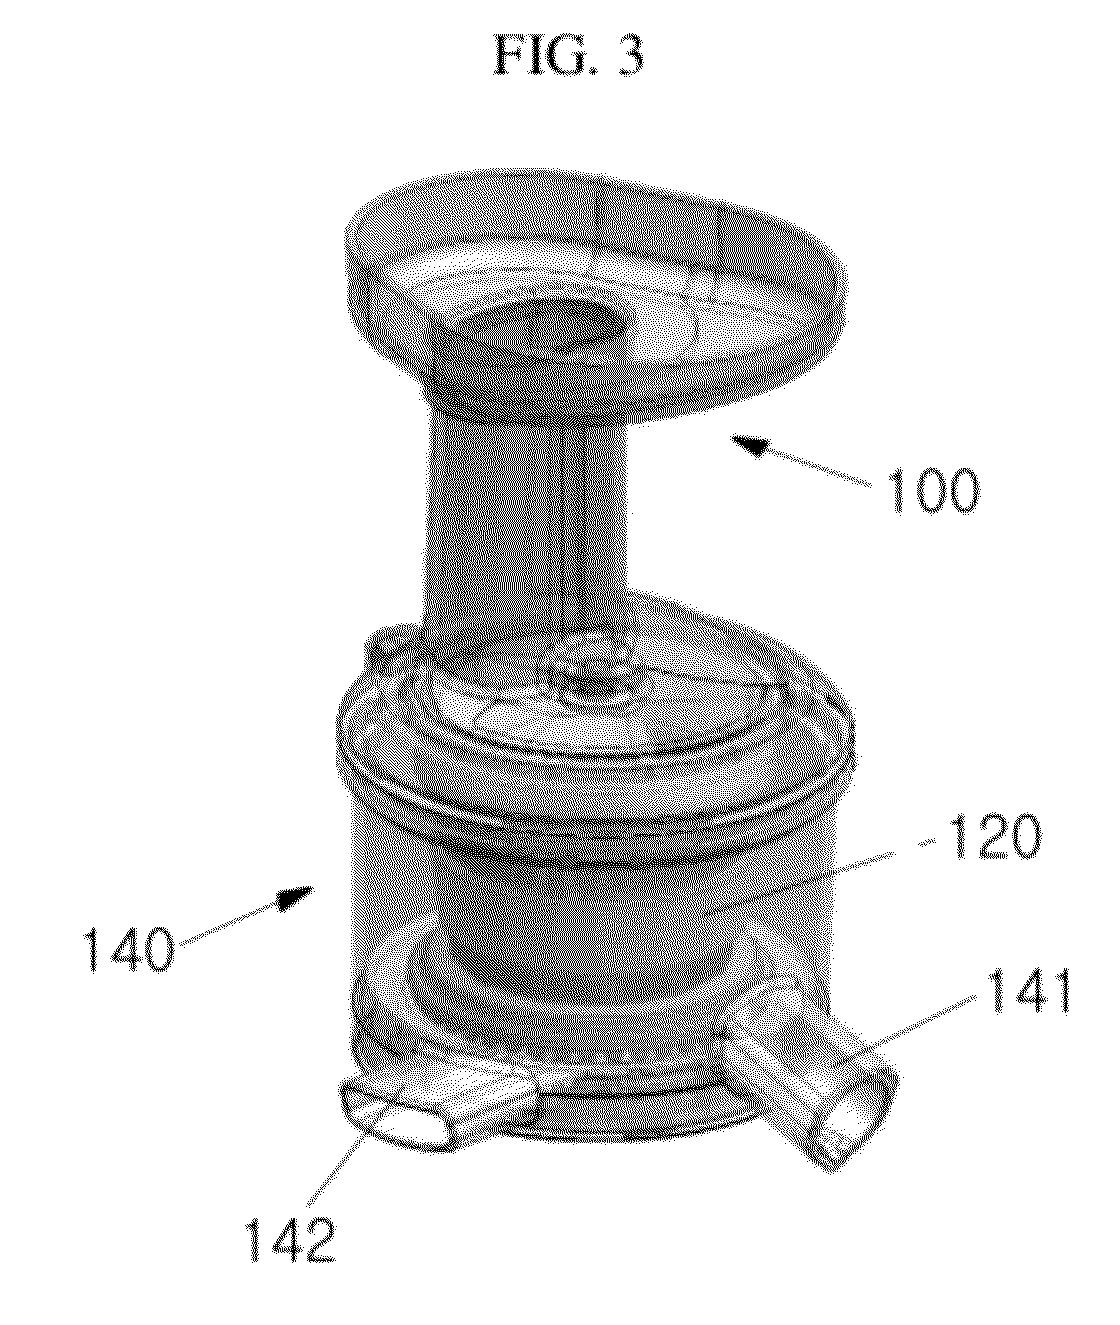 Apparatus for extracting juice